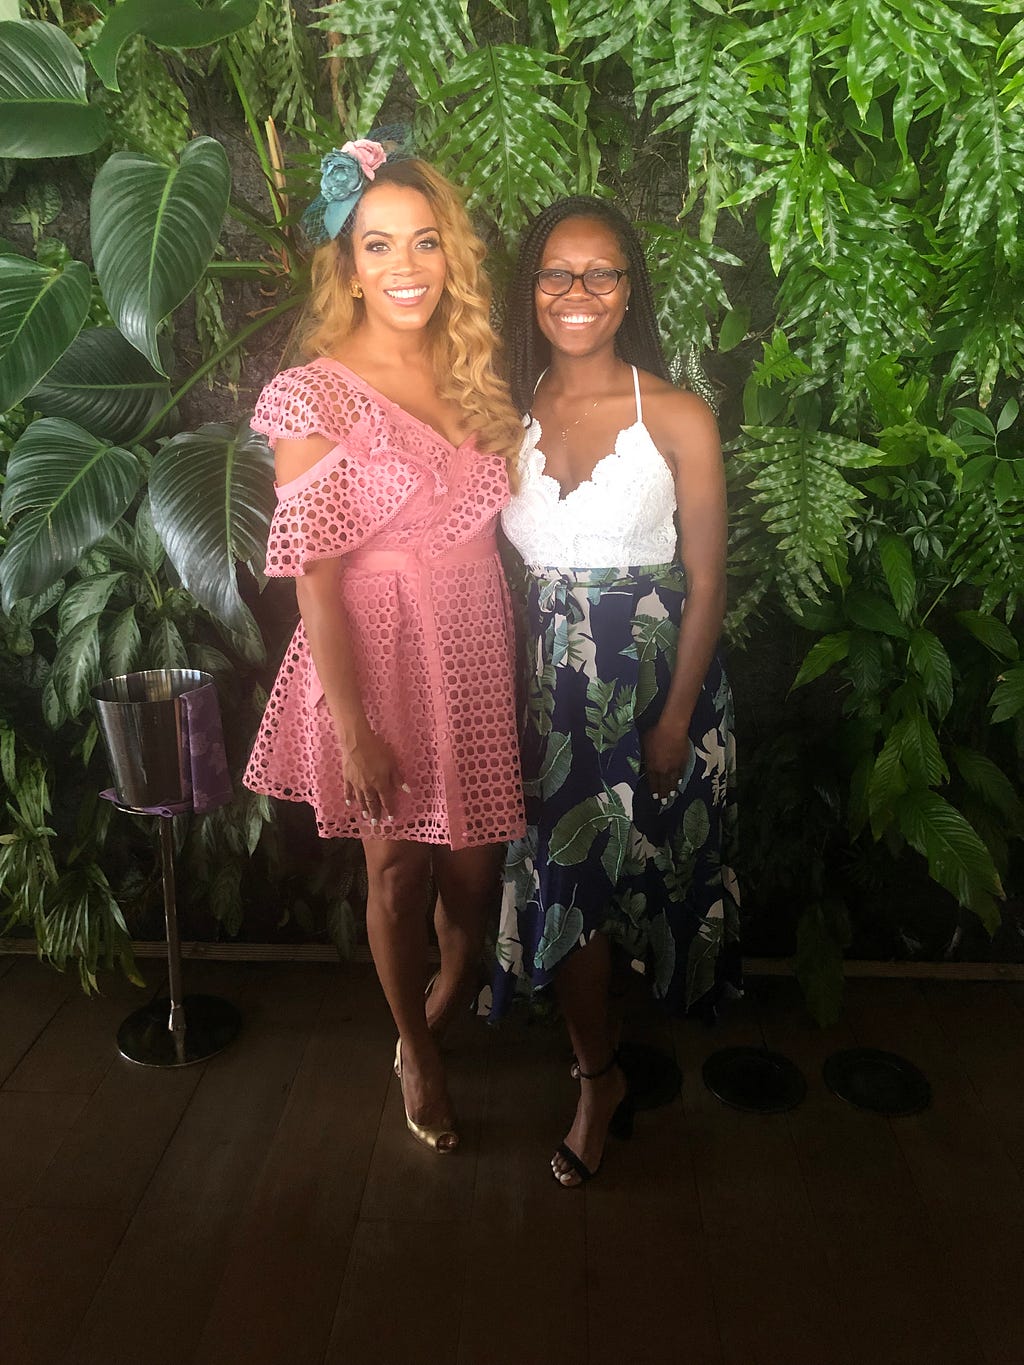 Jasmine with Heather Lindsey at the 2019 Pinky Promise Conference in Miami, Florida